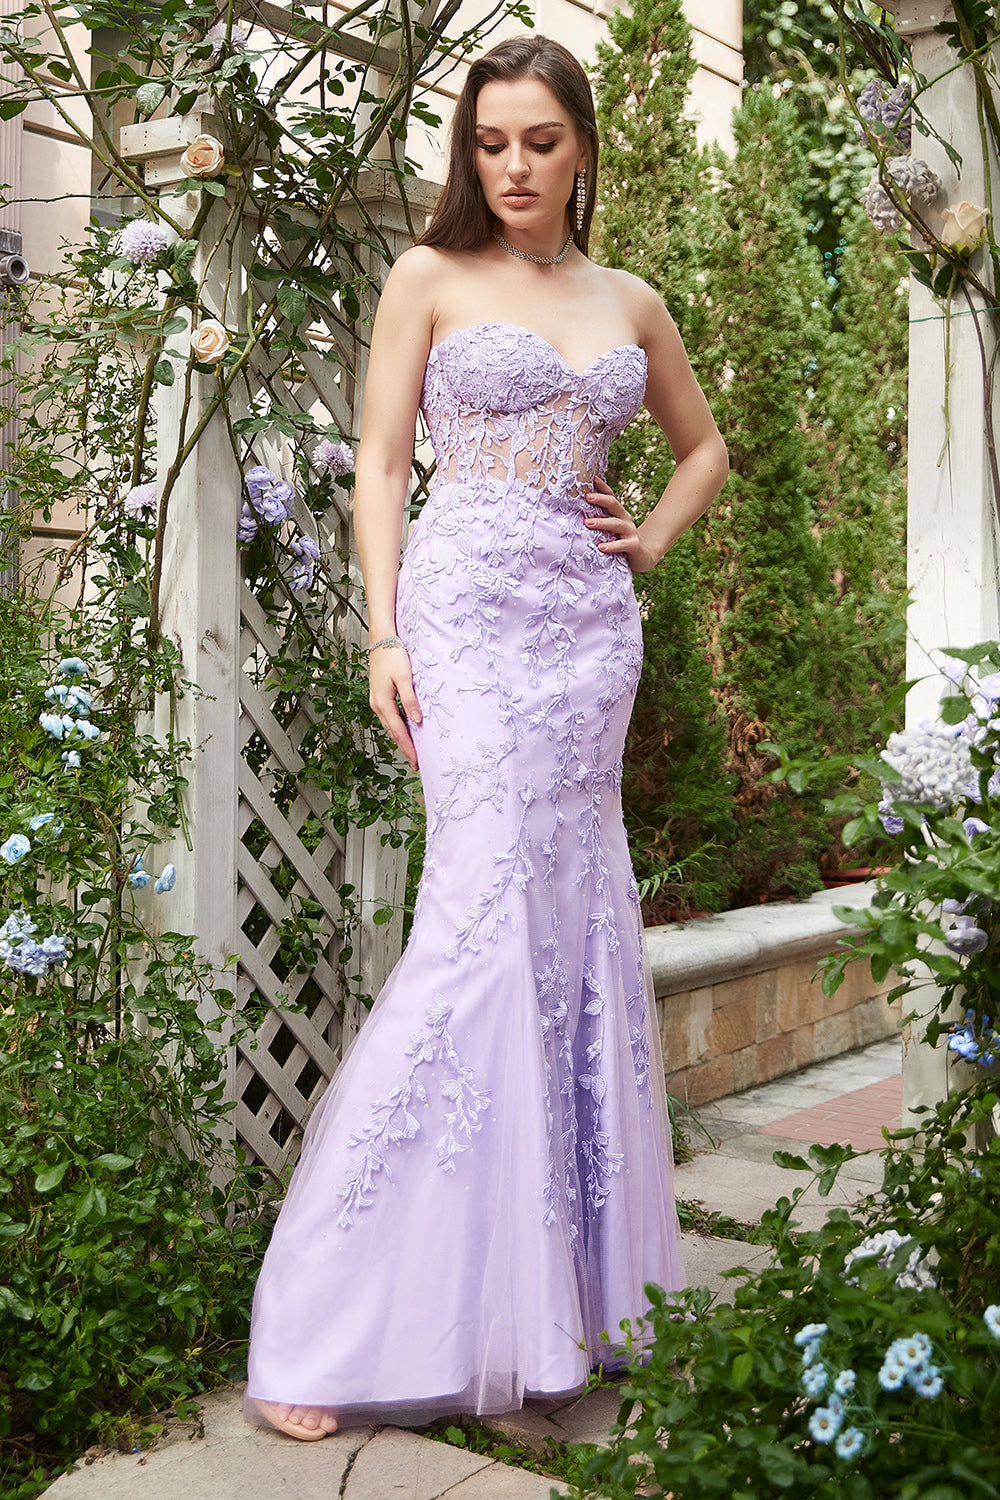 Sweetheart Neck Mermaid Long Purple Prom Dress With Appliques